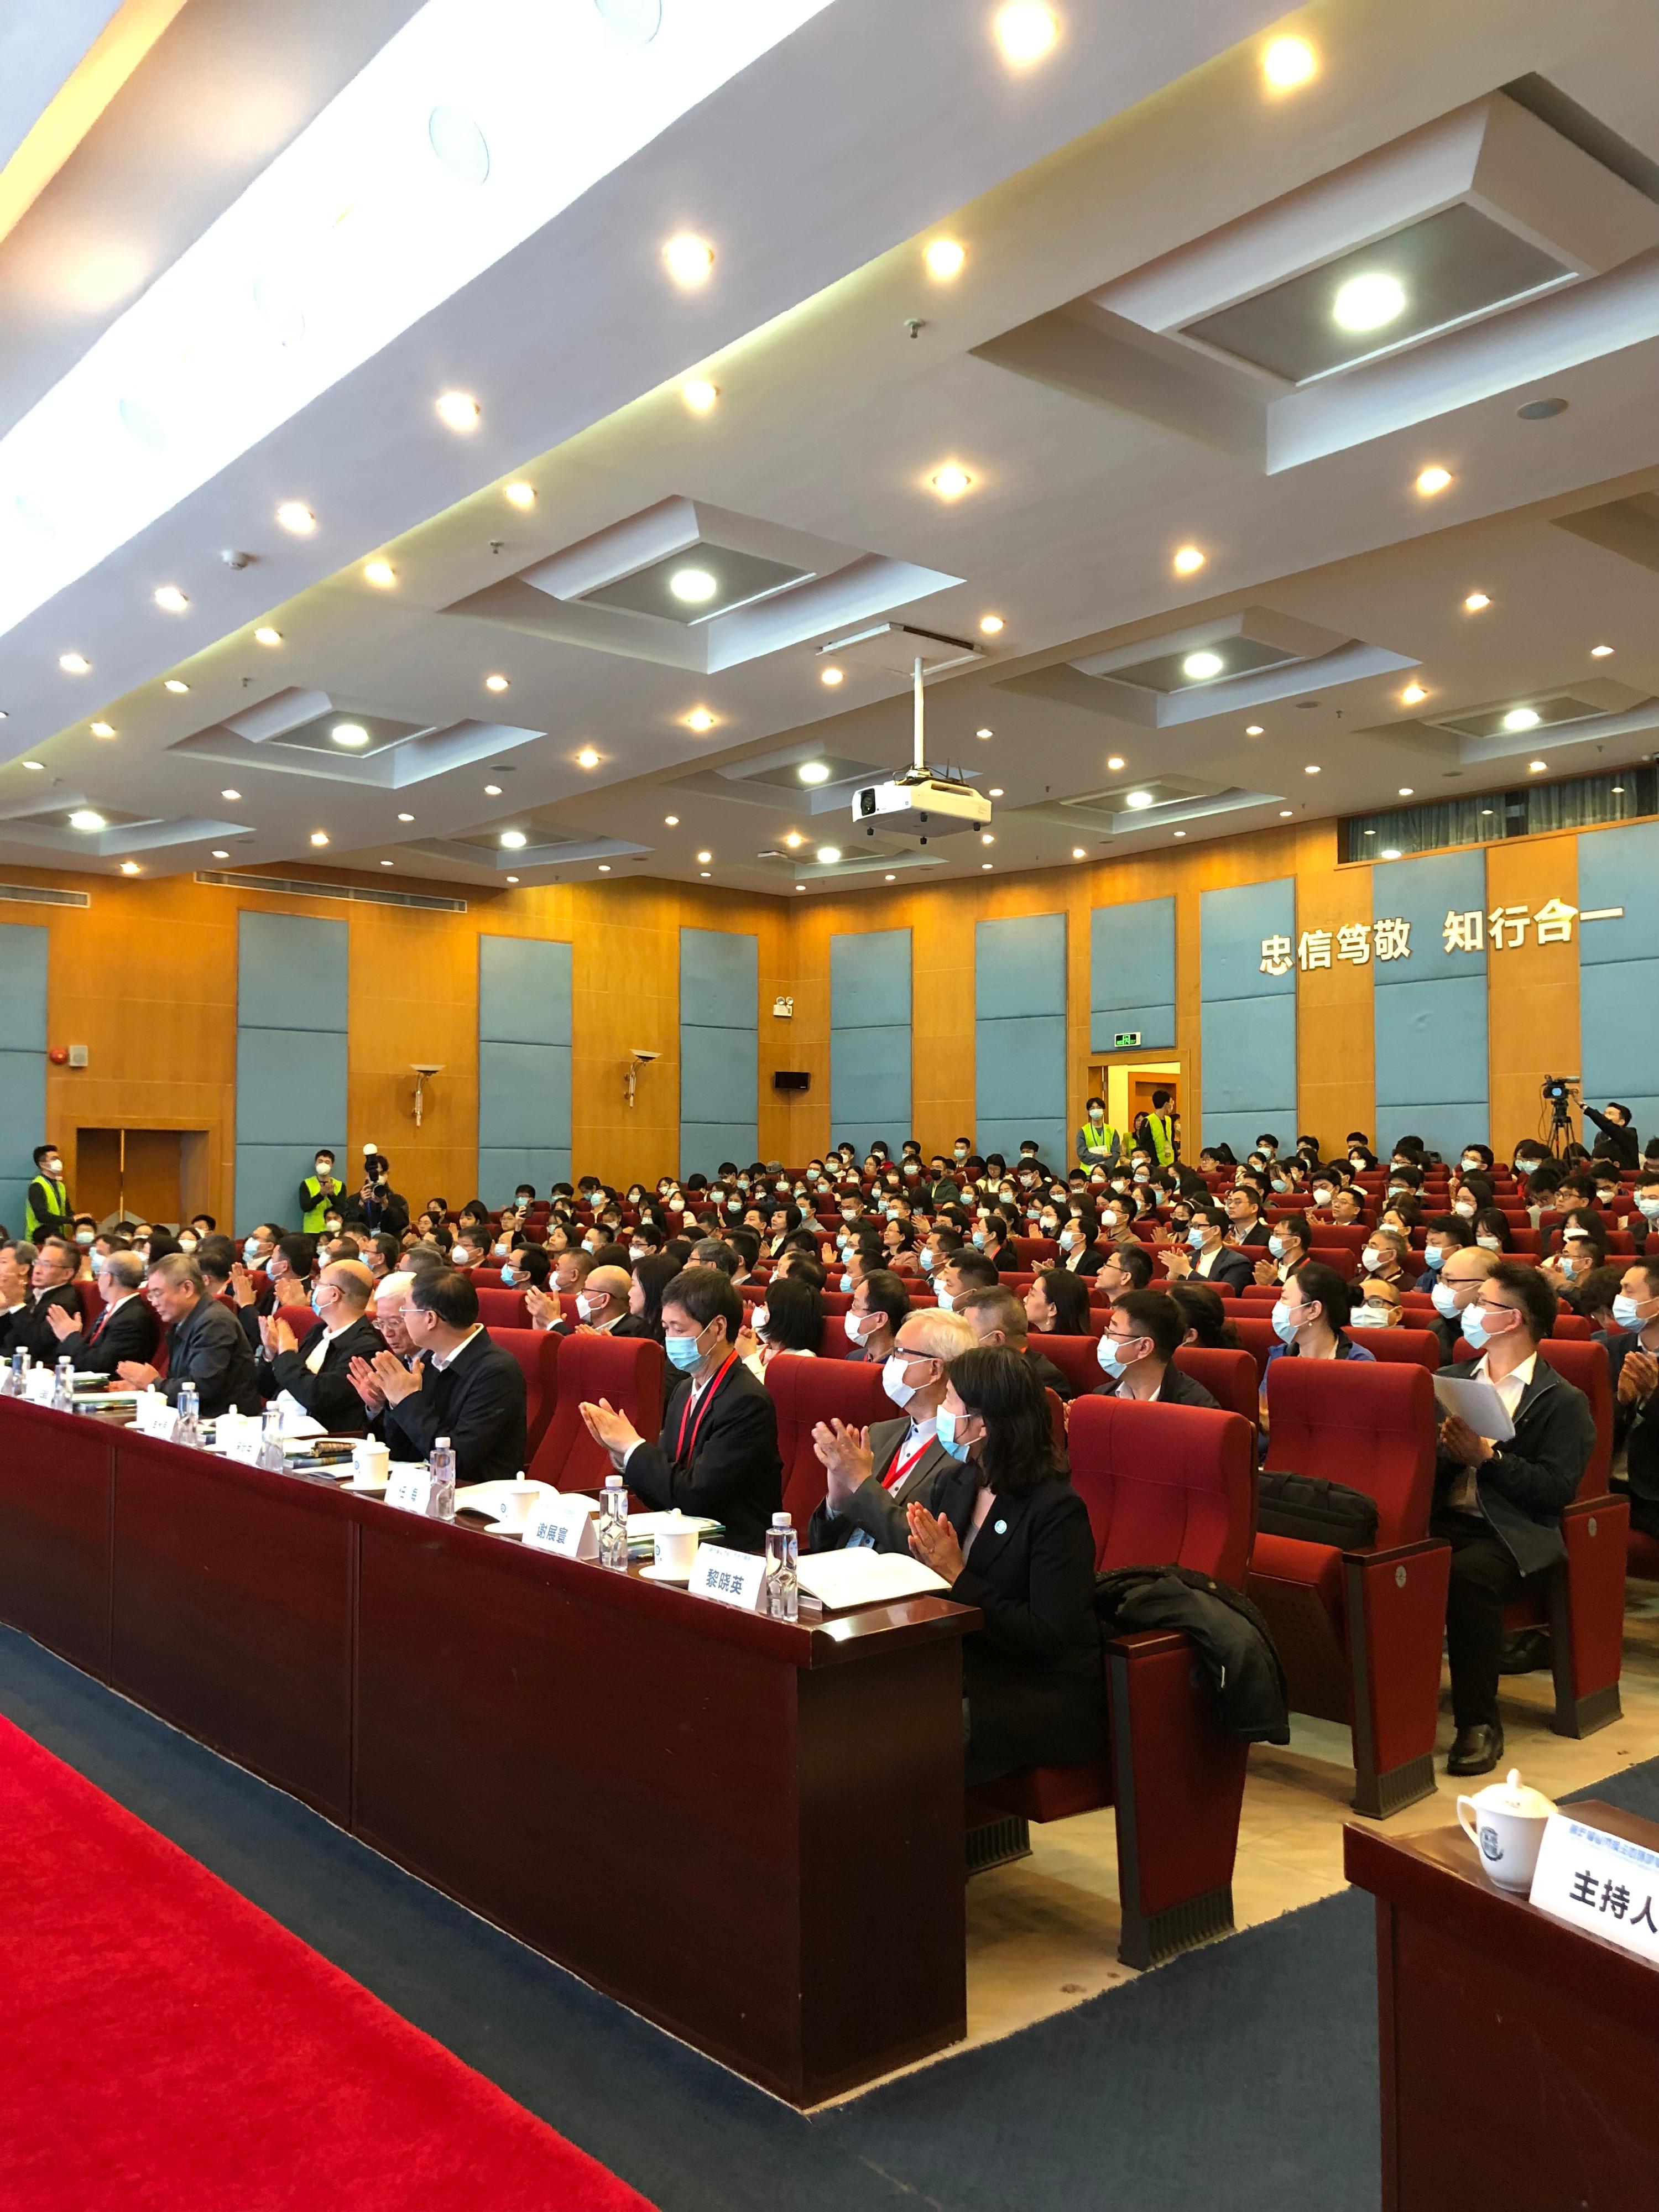 The Secretary for Environment and Ecology, Mr Tse Chin-wan, today (March 30) attended the opening ceremony of the Fifth Guangdong-Hong Kong-Macao Ecological Environment Forum, and visited Guangzhou Haizhu National Wetland Park as well as hydrogen-powered projects in Foshan. Photo shows Mr Tse (first row, second right) attending the opening ceremony of the Fifth Guangdong-Hong Kong- Macao Ecological Environment Forum.